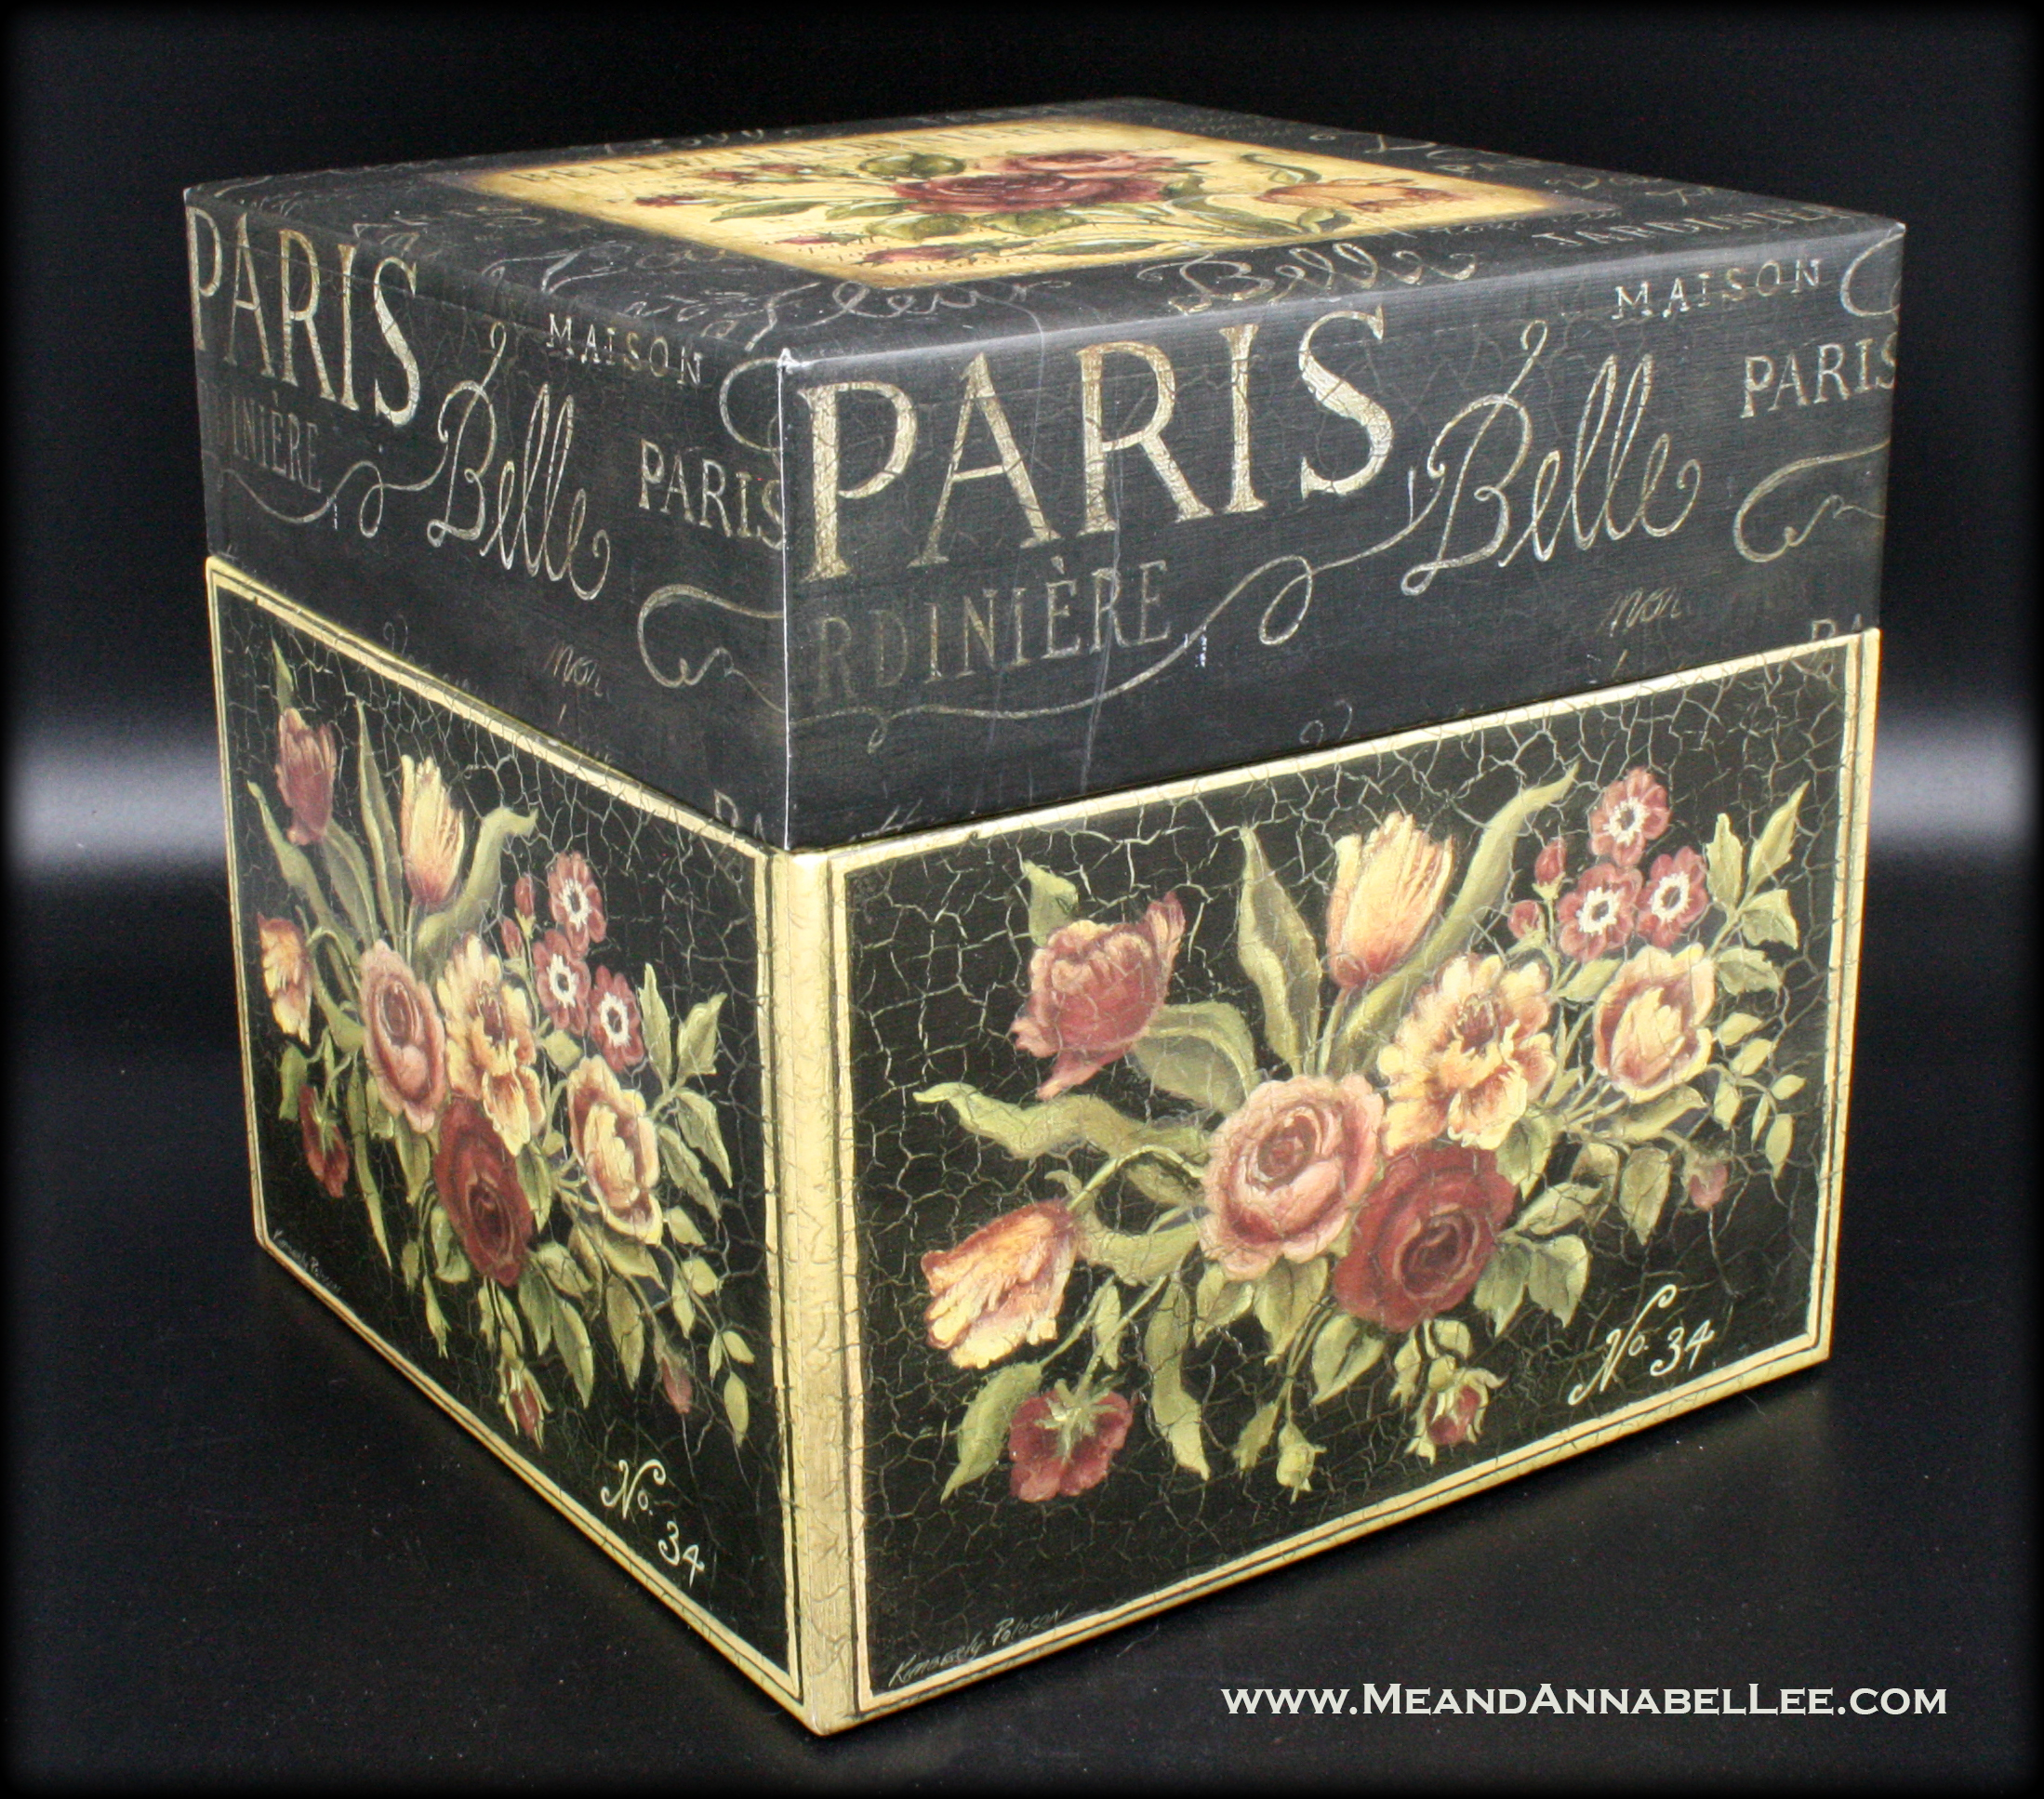 Holiday Crafts | Trash to Treasure | Transform a Gift Box into a Boxed Wine Dispenser | www.MeandAnnabelLee.com